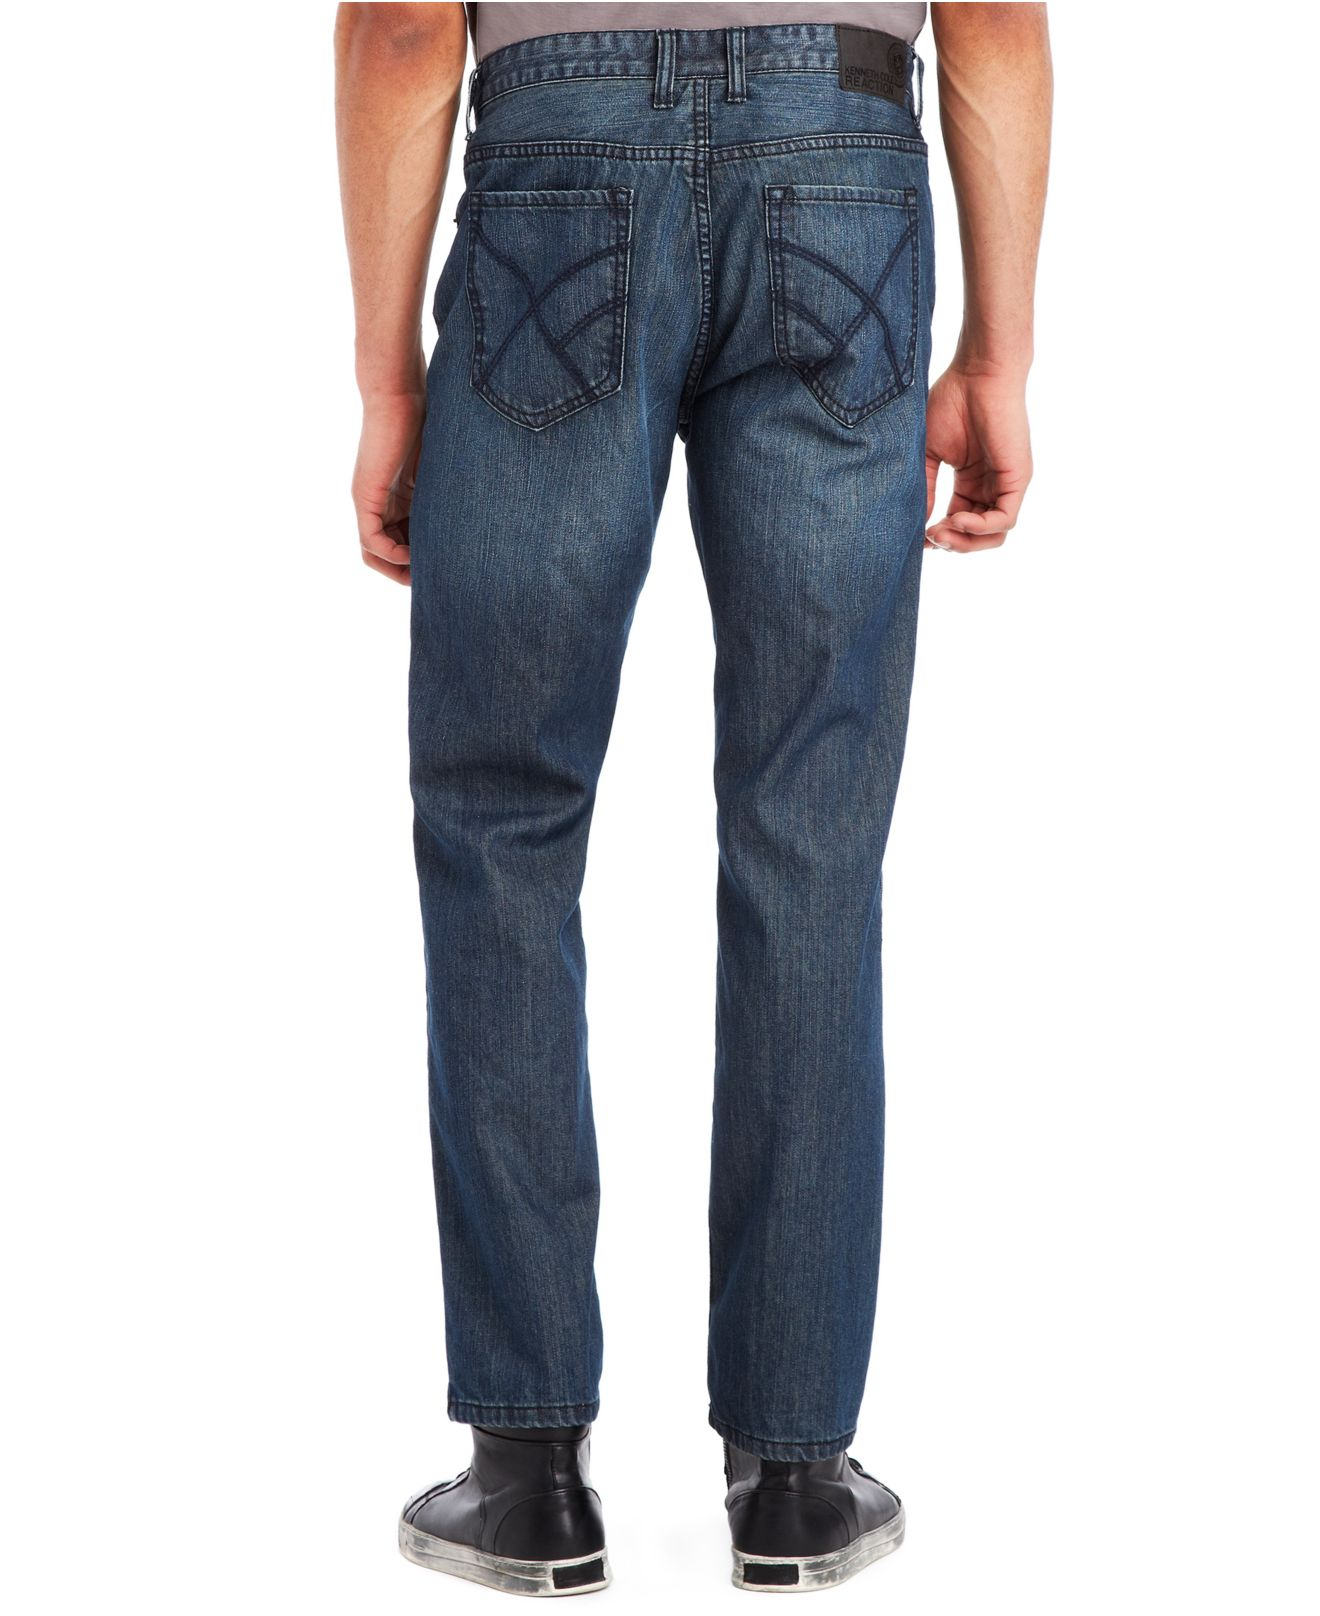 Kenneth Cole Reaction Relaxed-Fit Jeans in Blue for Men - Lyst